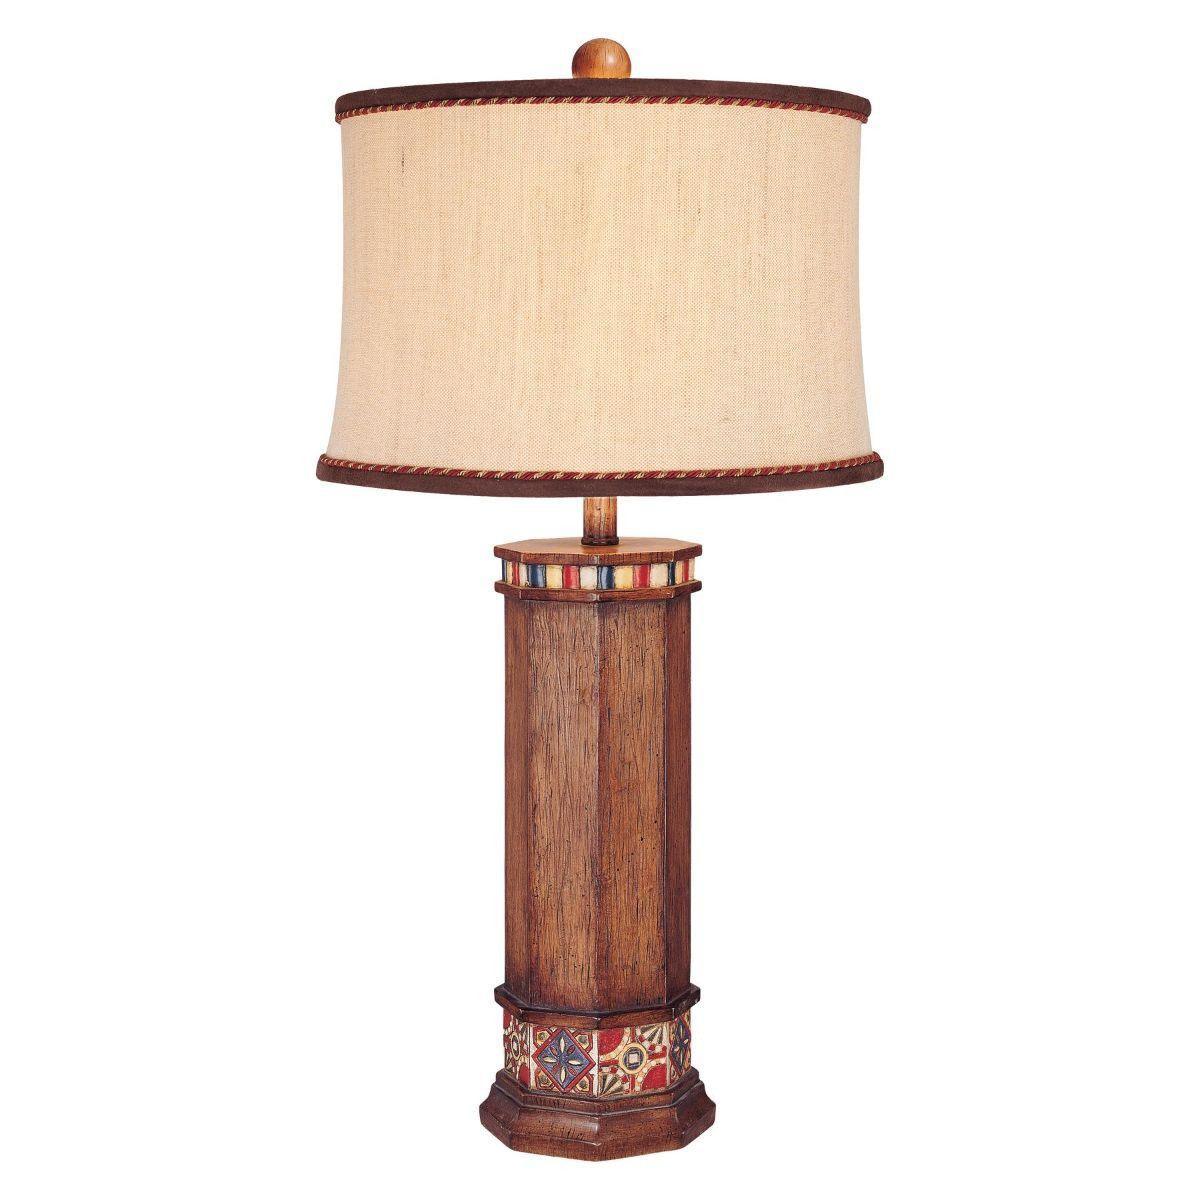 Ambience 1 Light Table Lamp Hand Painted Wood Finish